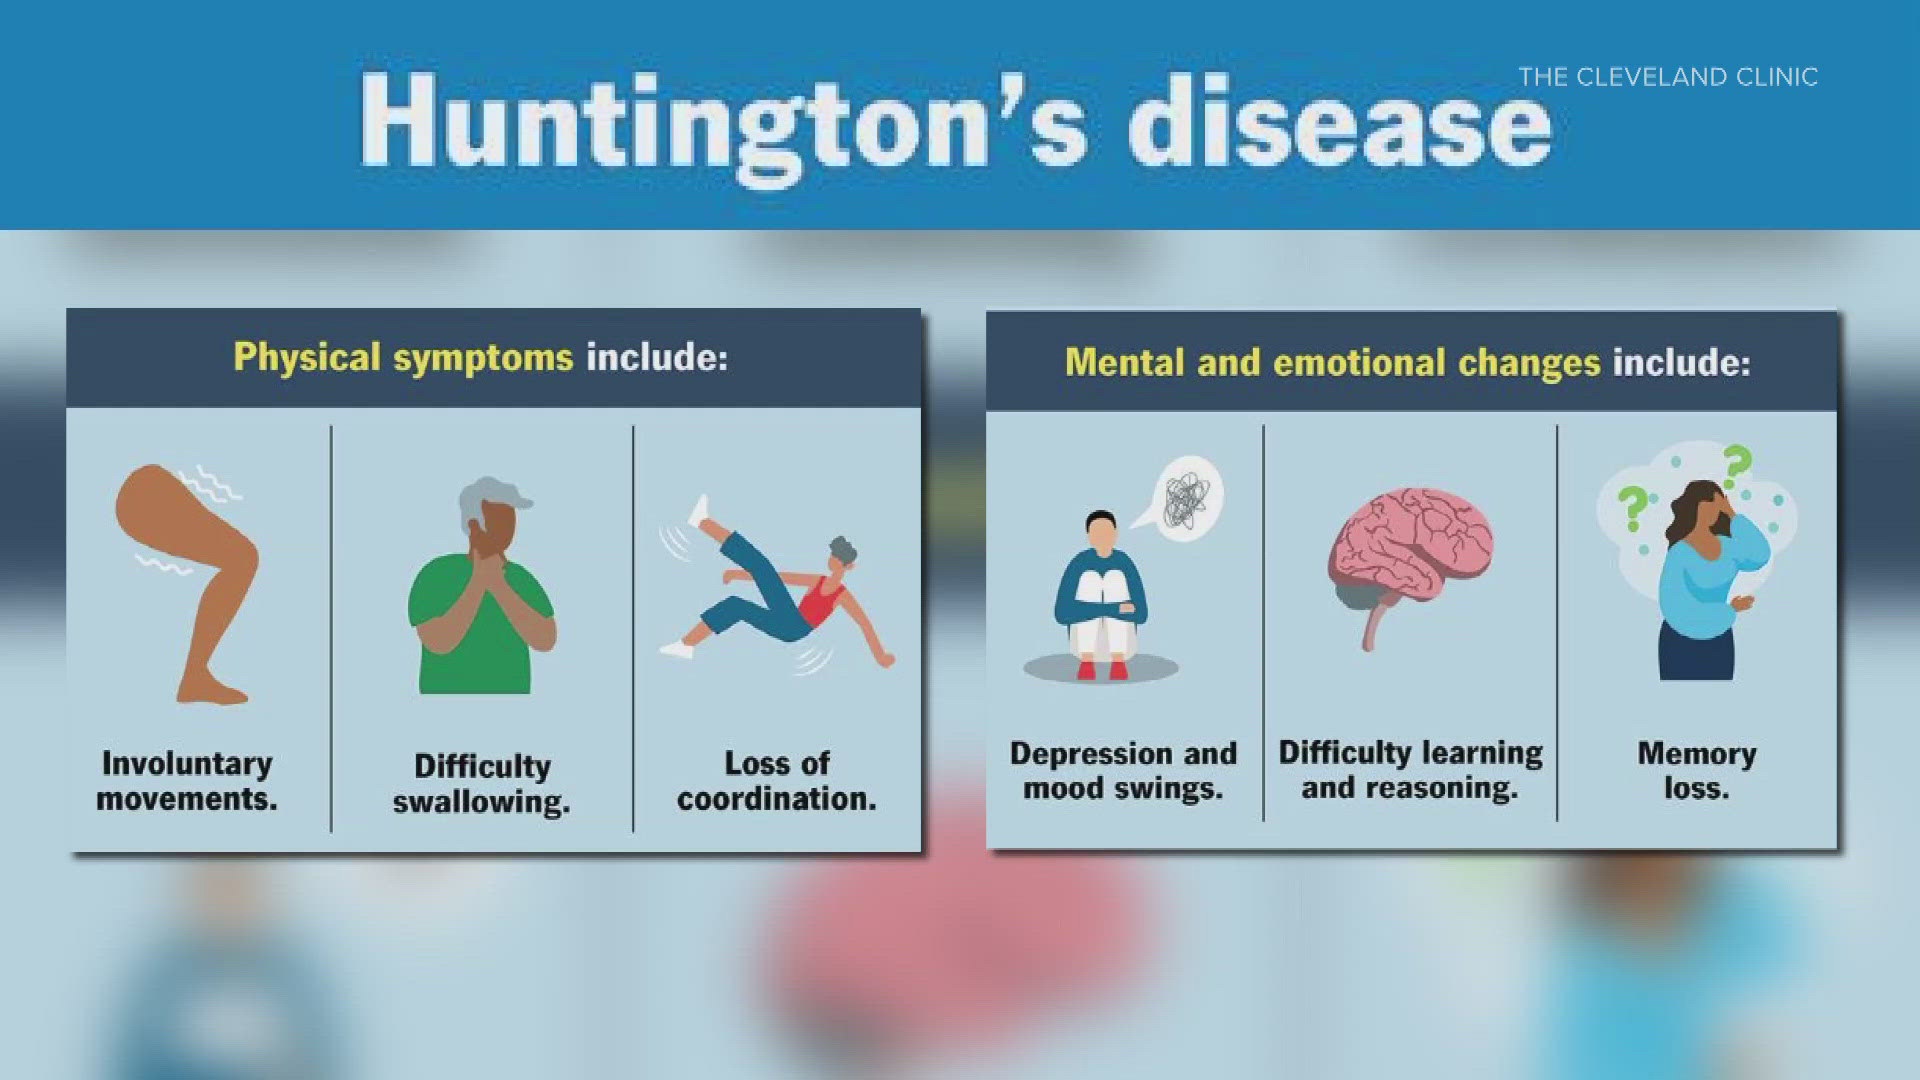 9NEWS medical expert Dr. Payal Kohli explains what Huntington's disease is, the main symptoms and how it's treated.